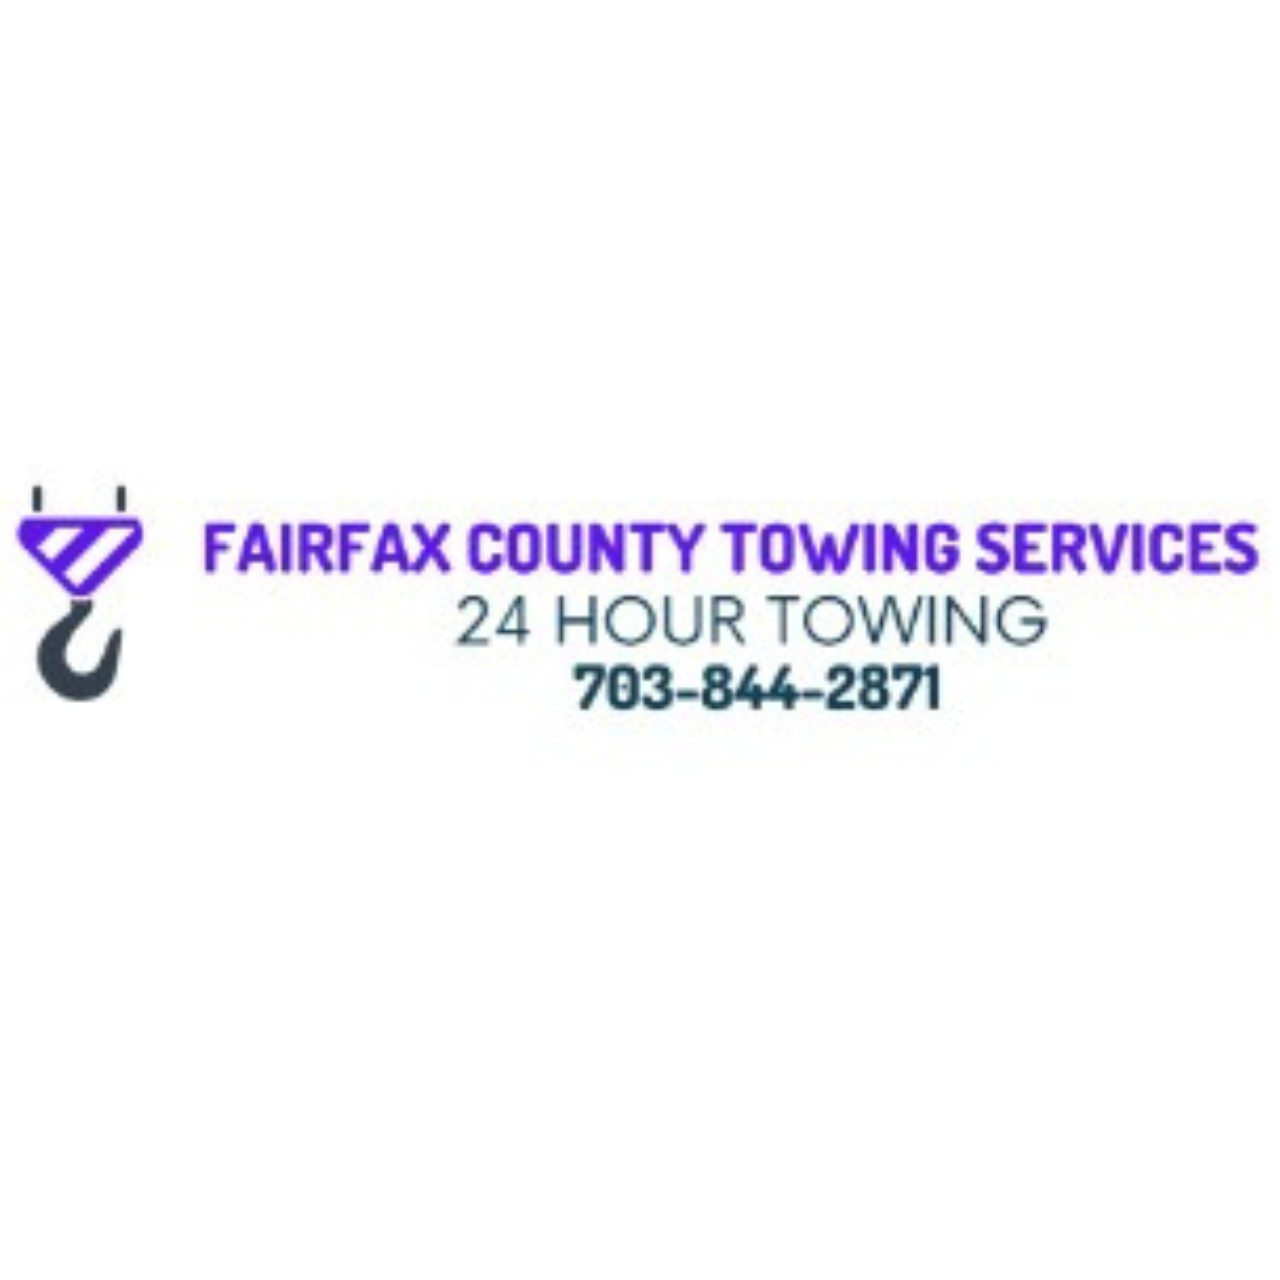 Fairfax County Towing Services